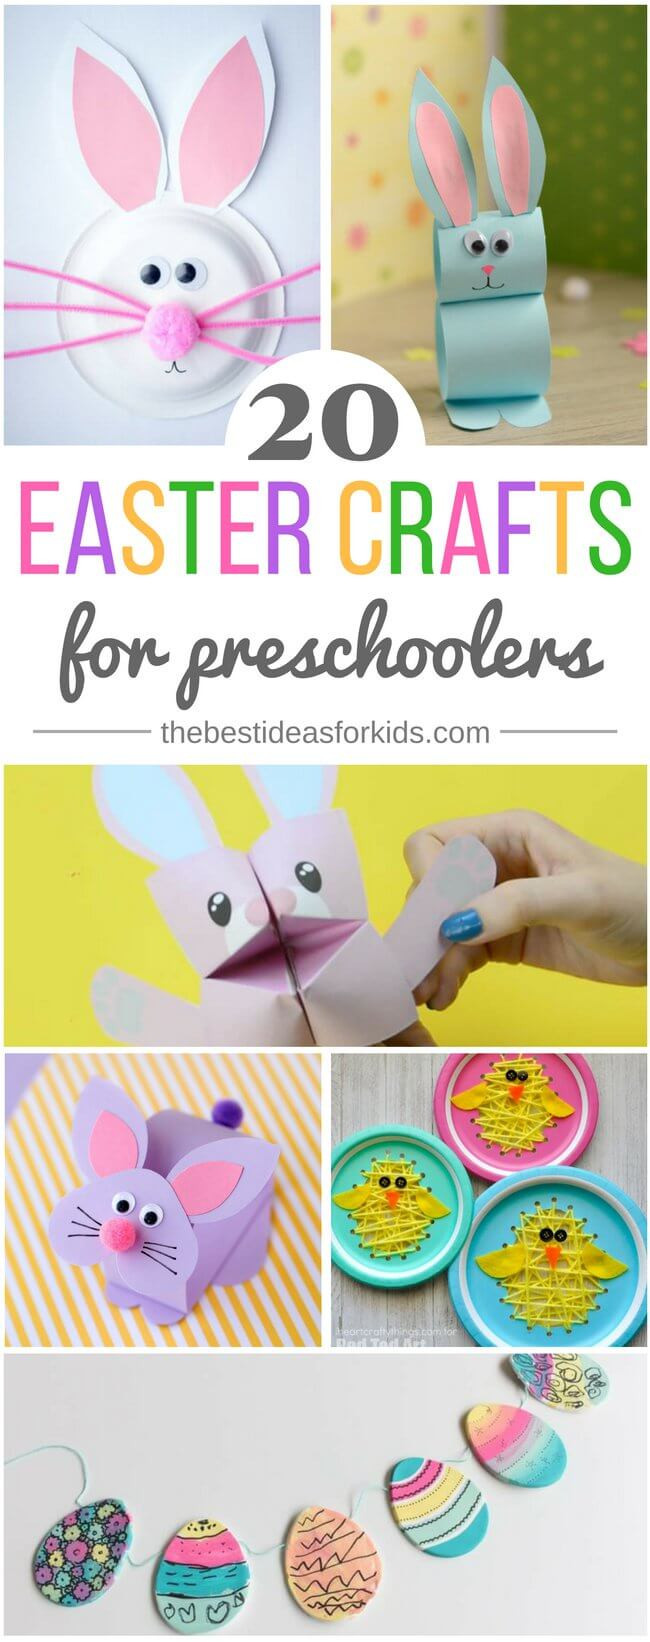 Easter Craft Ideas For Preschoolers
 20 Easter Crafts for Preschoolers The Best Ideas for Kids